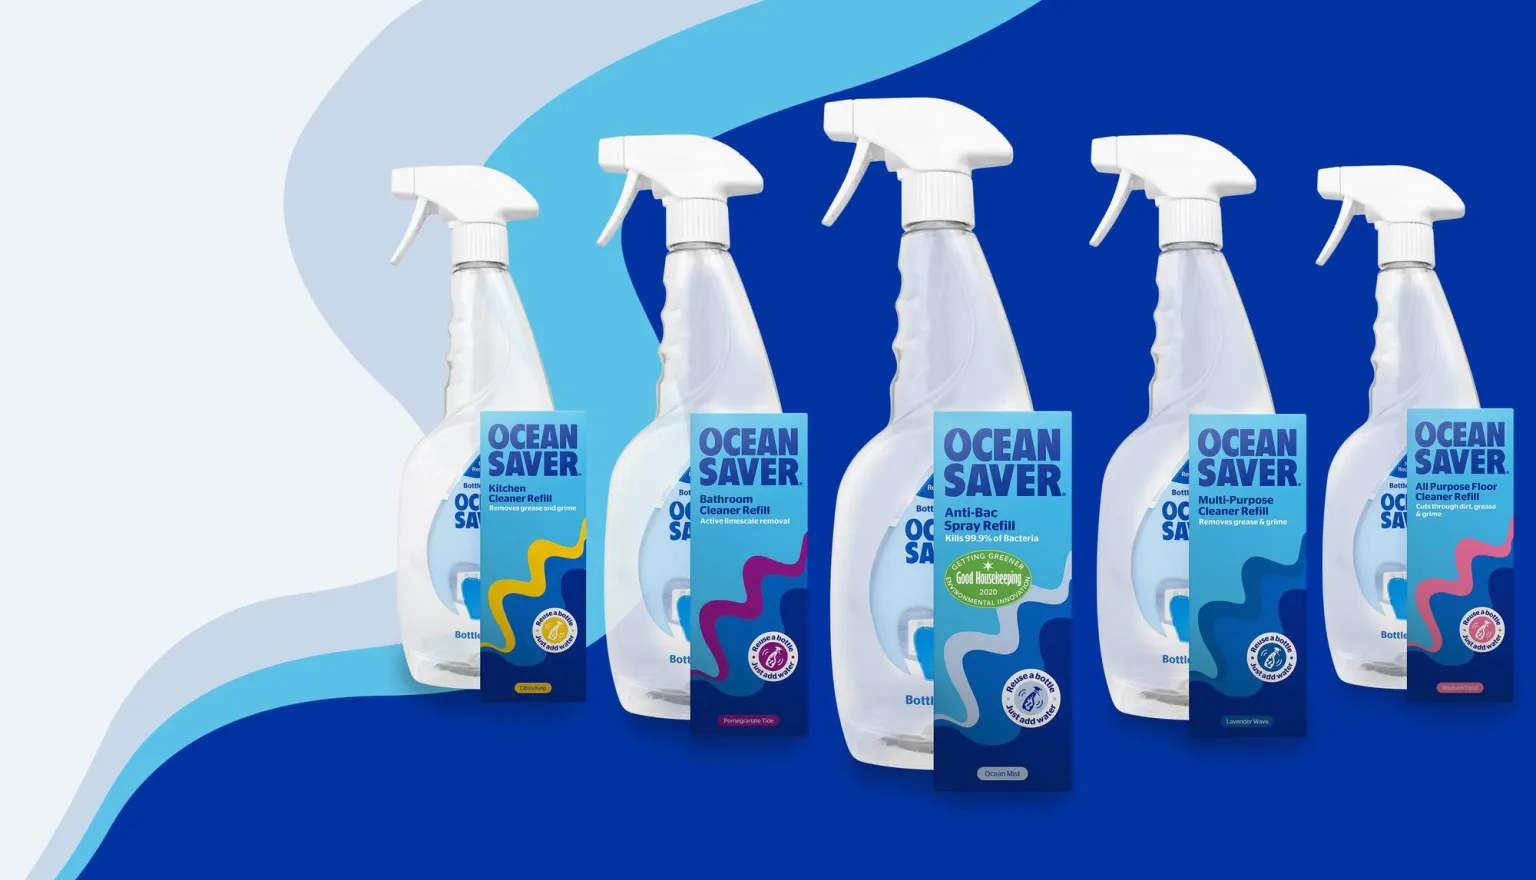 Concentrated, water-soluble cleaning pods